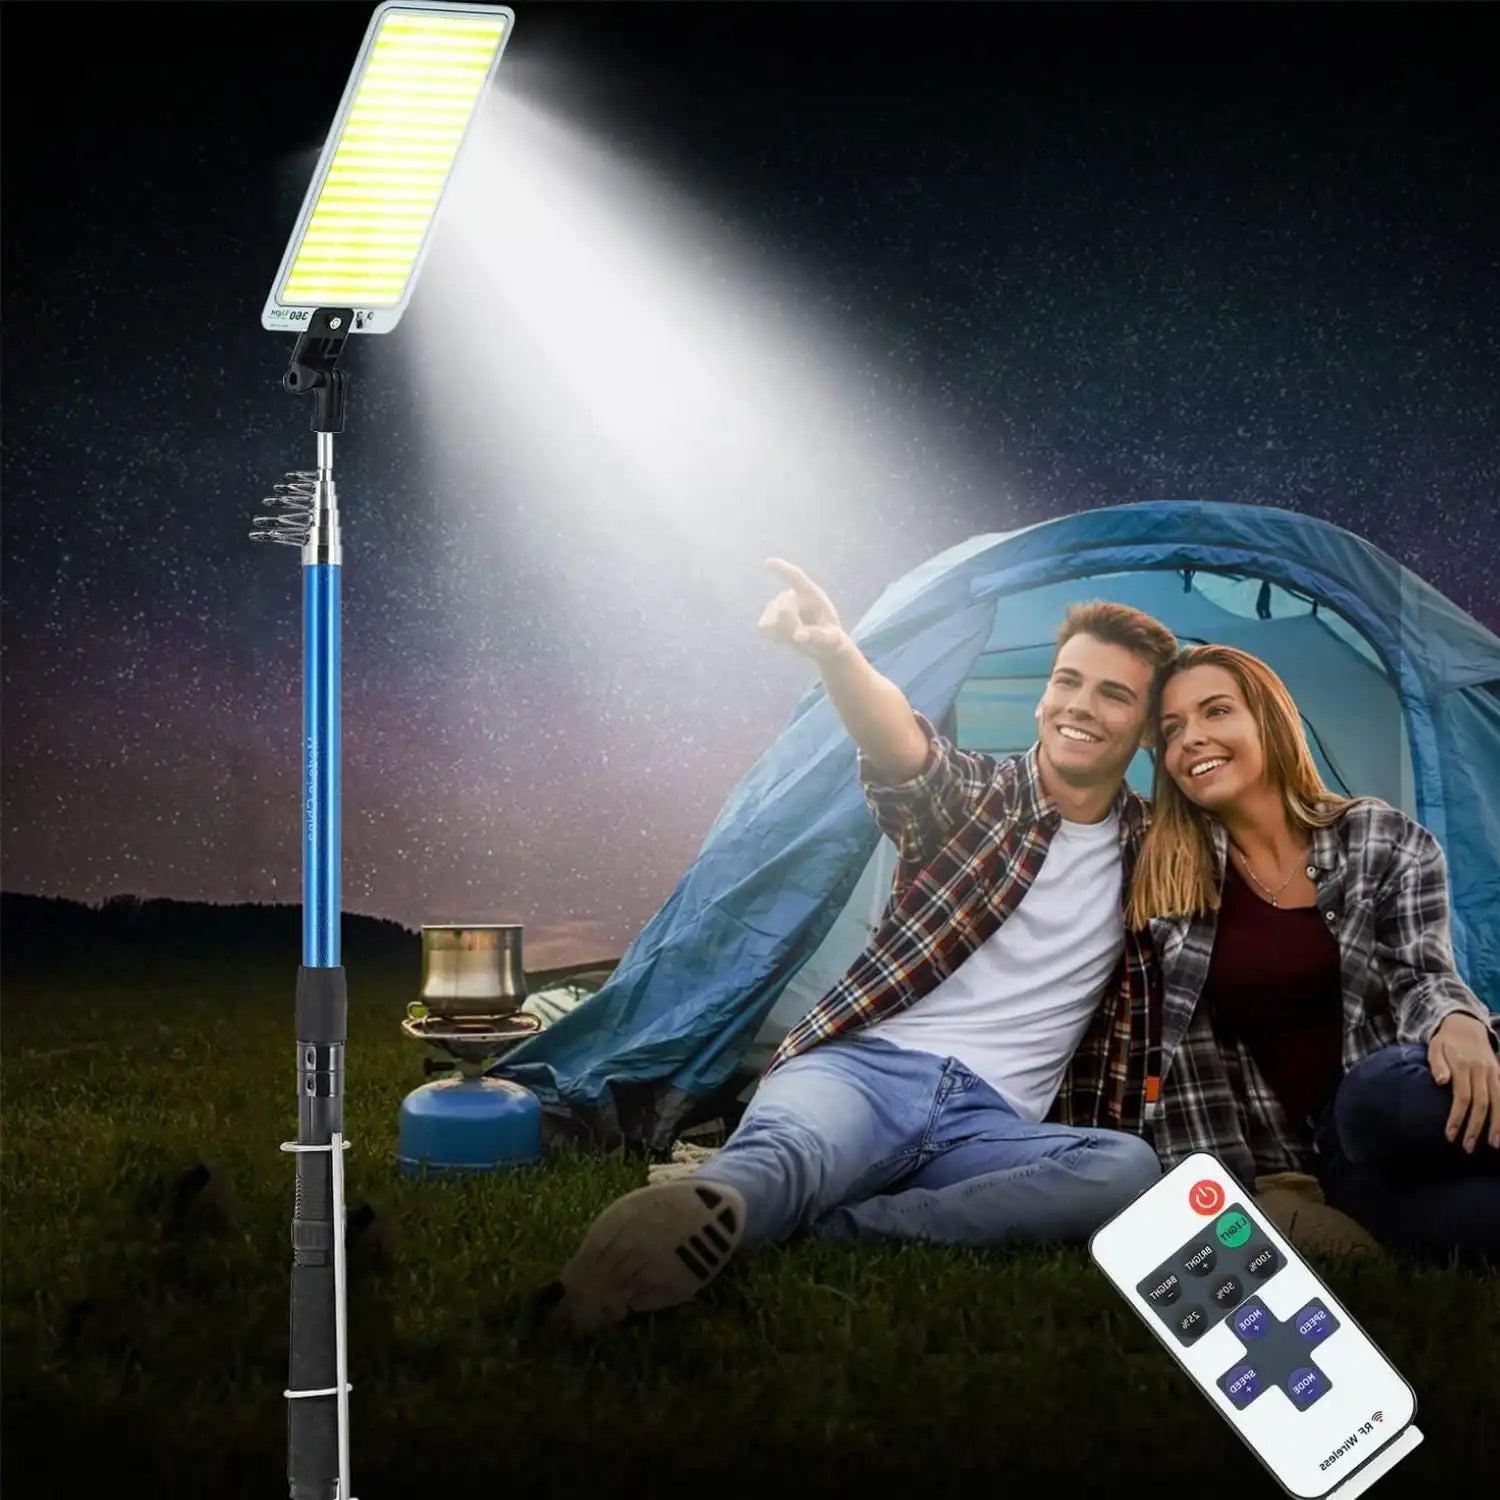 5M Outdoor Camping LED Light 48000LM – Full Throttle Pakistan